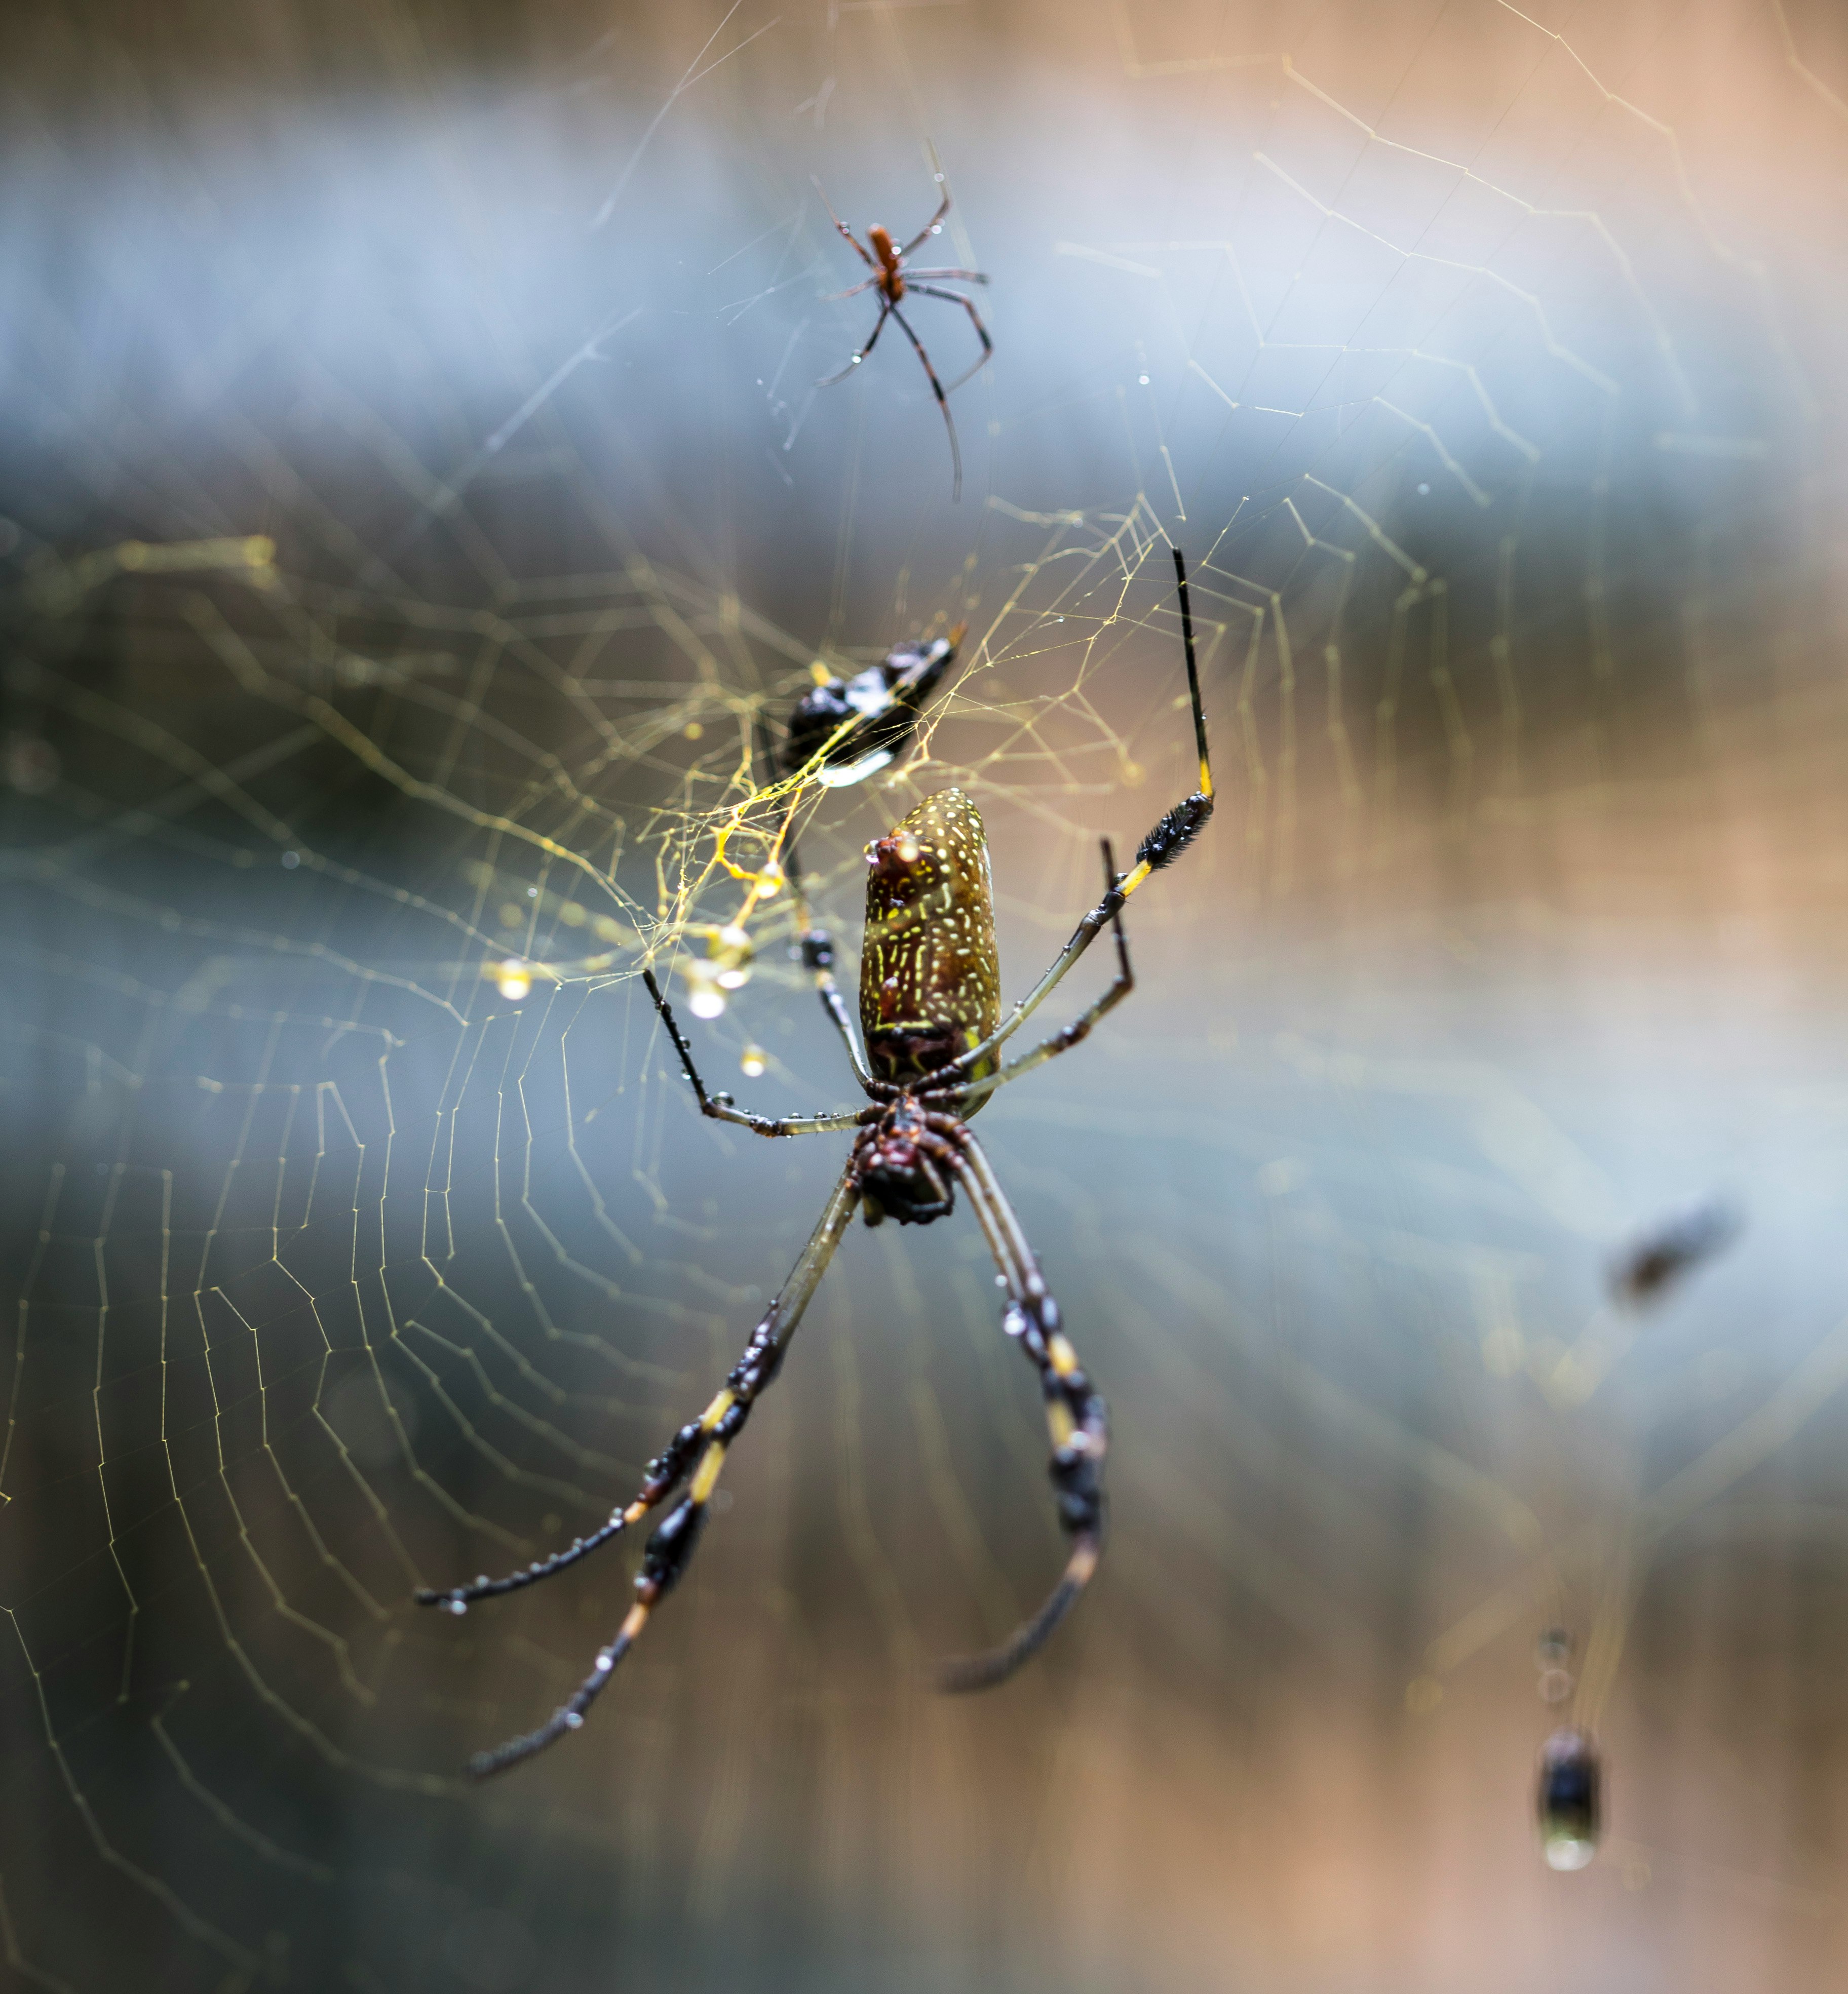 black and brown spider on web in close up photography during daytime